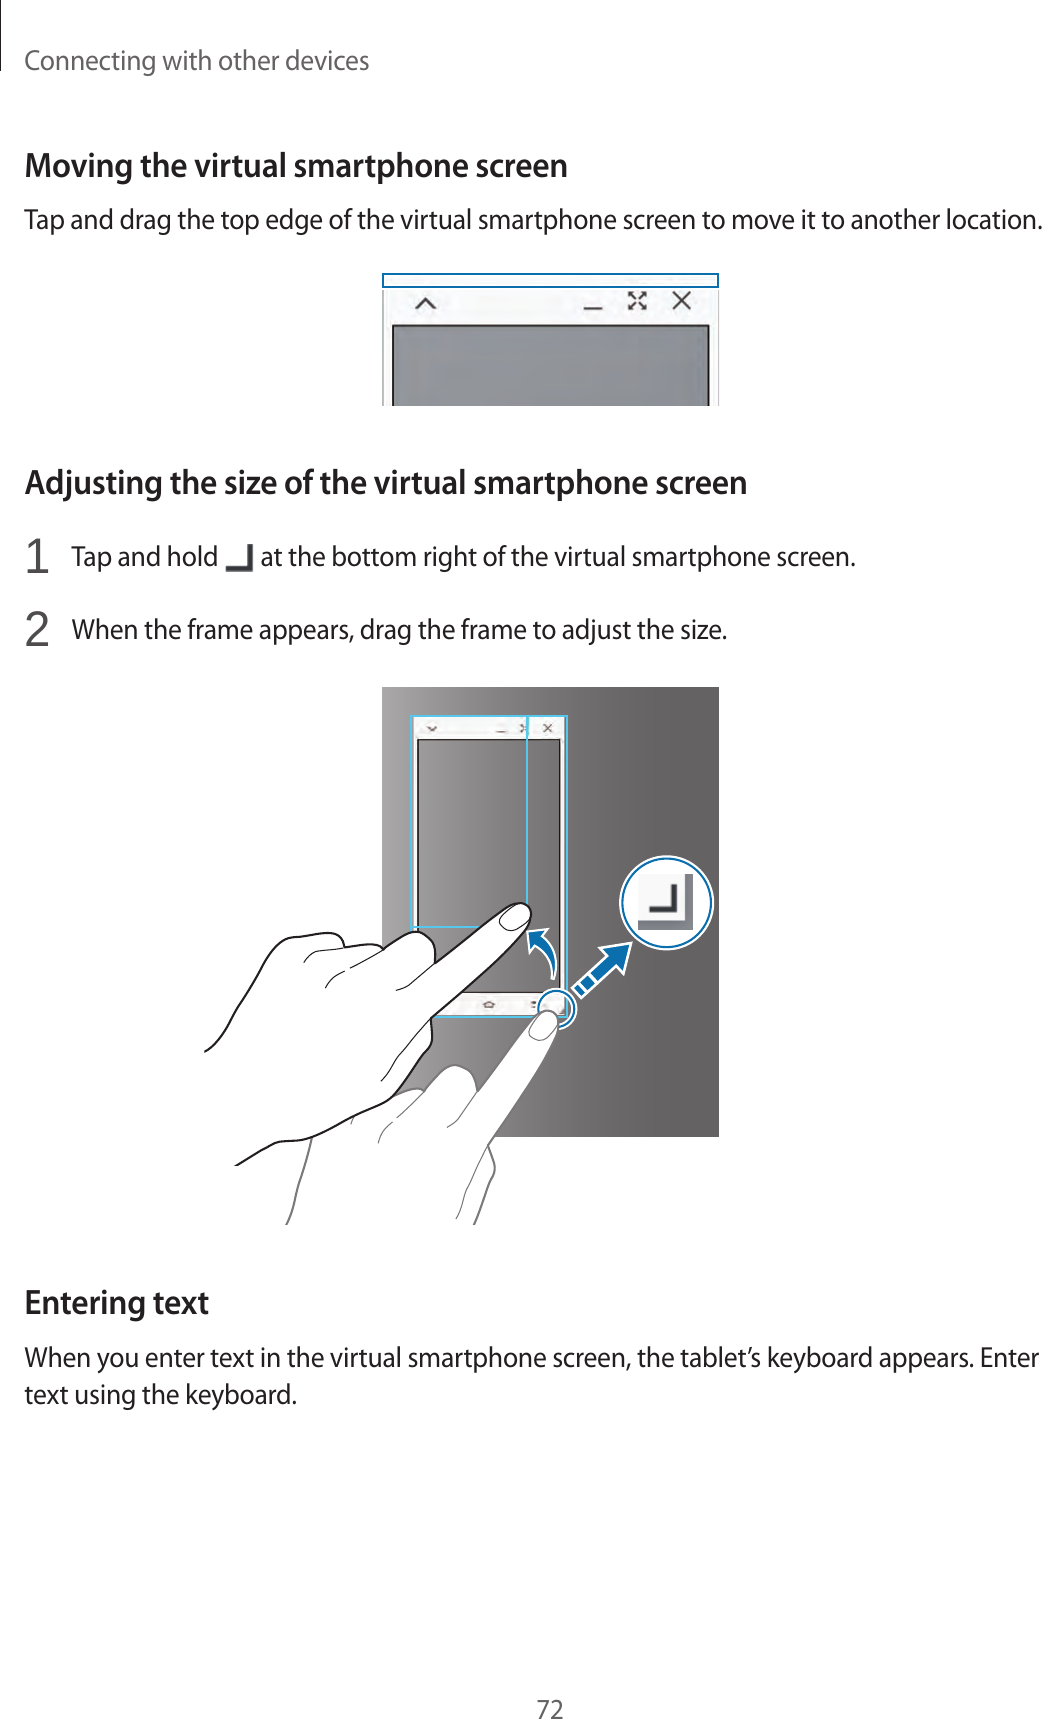 Connecting with other devices72Moving the virtual smartphone screenTap and drag the top edge of the virtual smartphone screen to move it to another location.Adjusting the size of the virtual smartphone screen1  Tap and hold   at the bottom right of the virtual smartphone screen.2  When the frame appears, drag the frame to adjust the size.Entering textWhen you enter text in the virtual smartphone screen, the tablet’s keyboard appears. Enter text using the keyboard.